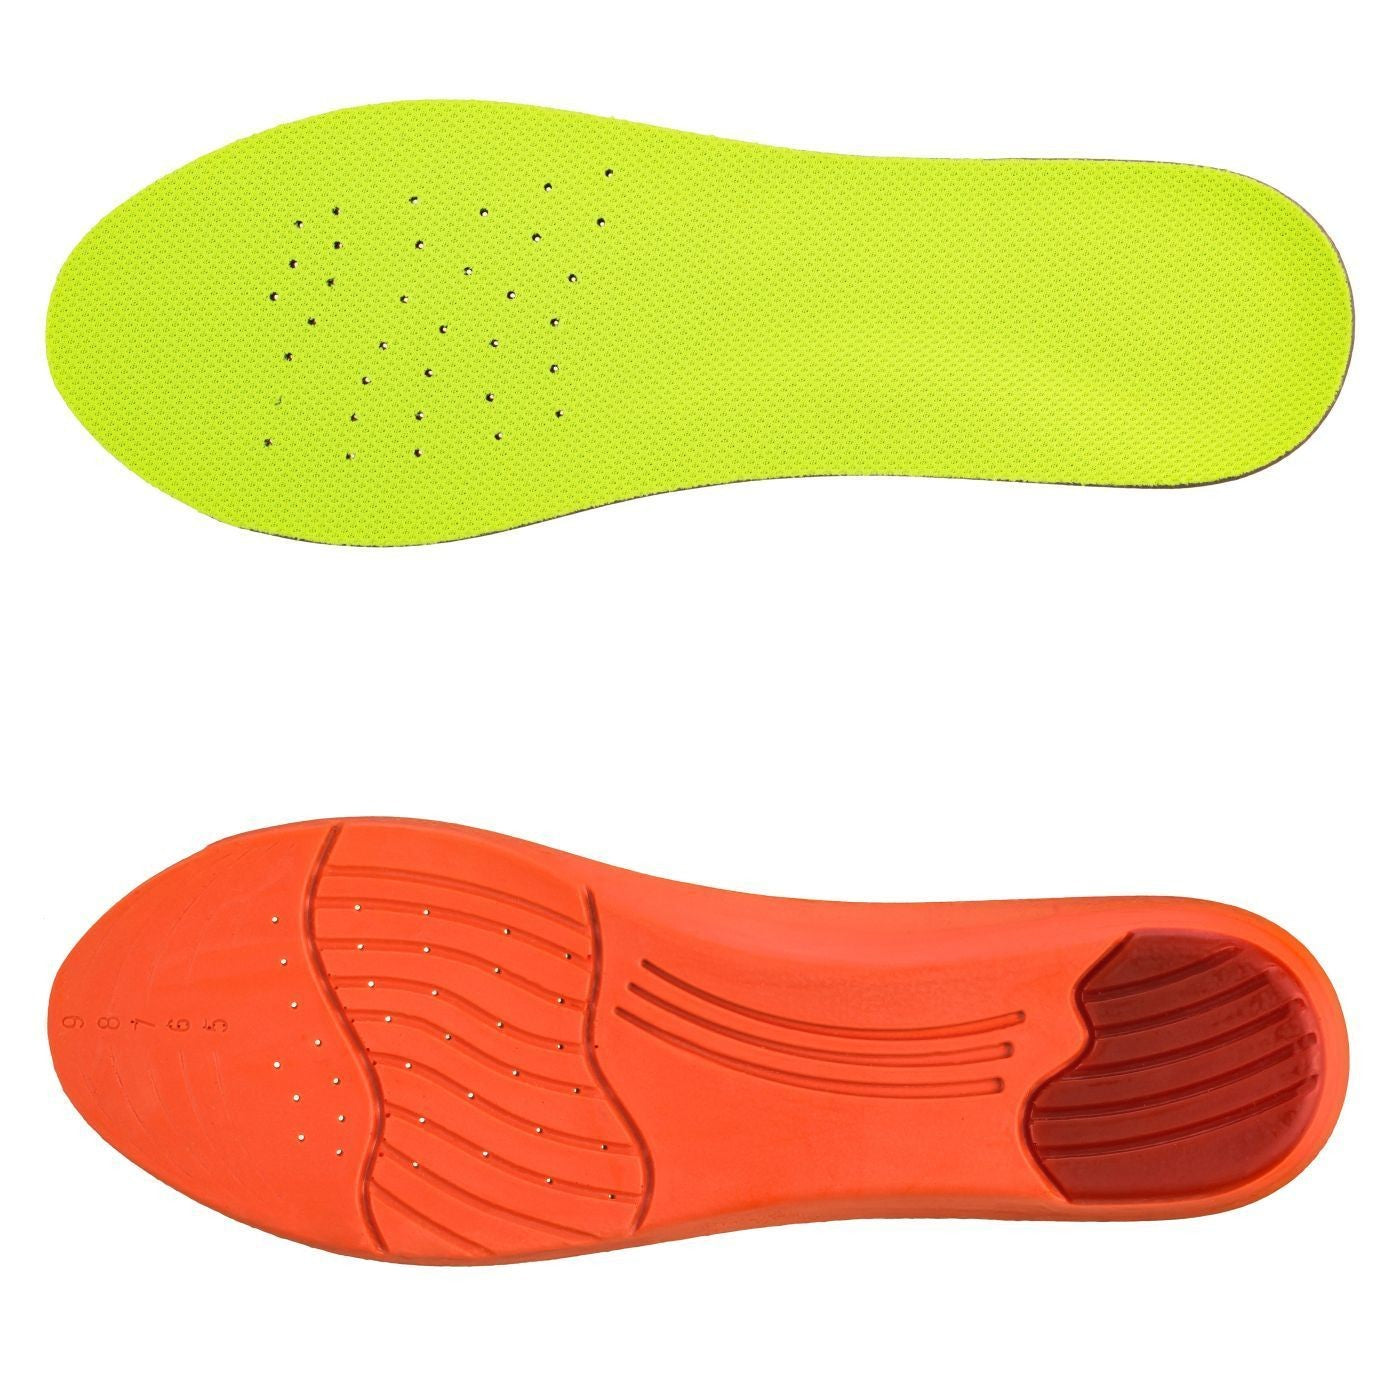 Elevator shoes height increase IK307 - Breathable Mesh Memory Foam Comfort Height Increase Insole - 1.3 CM | 0.5 INCH Taller